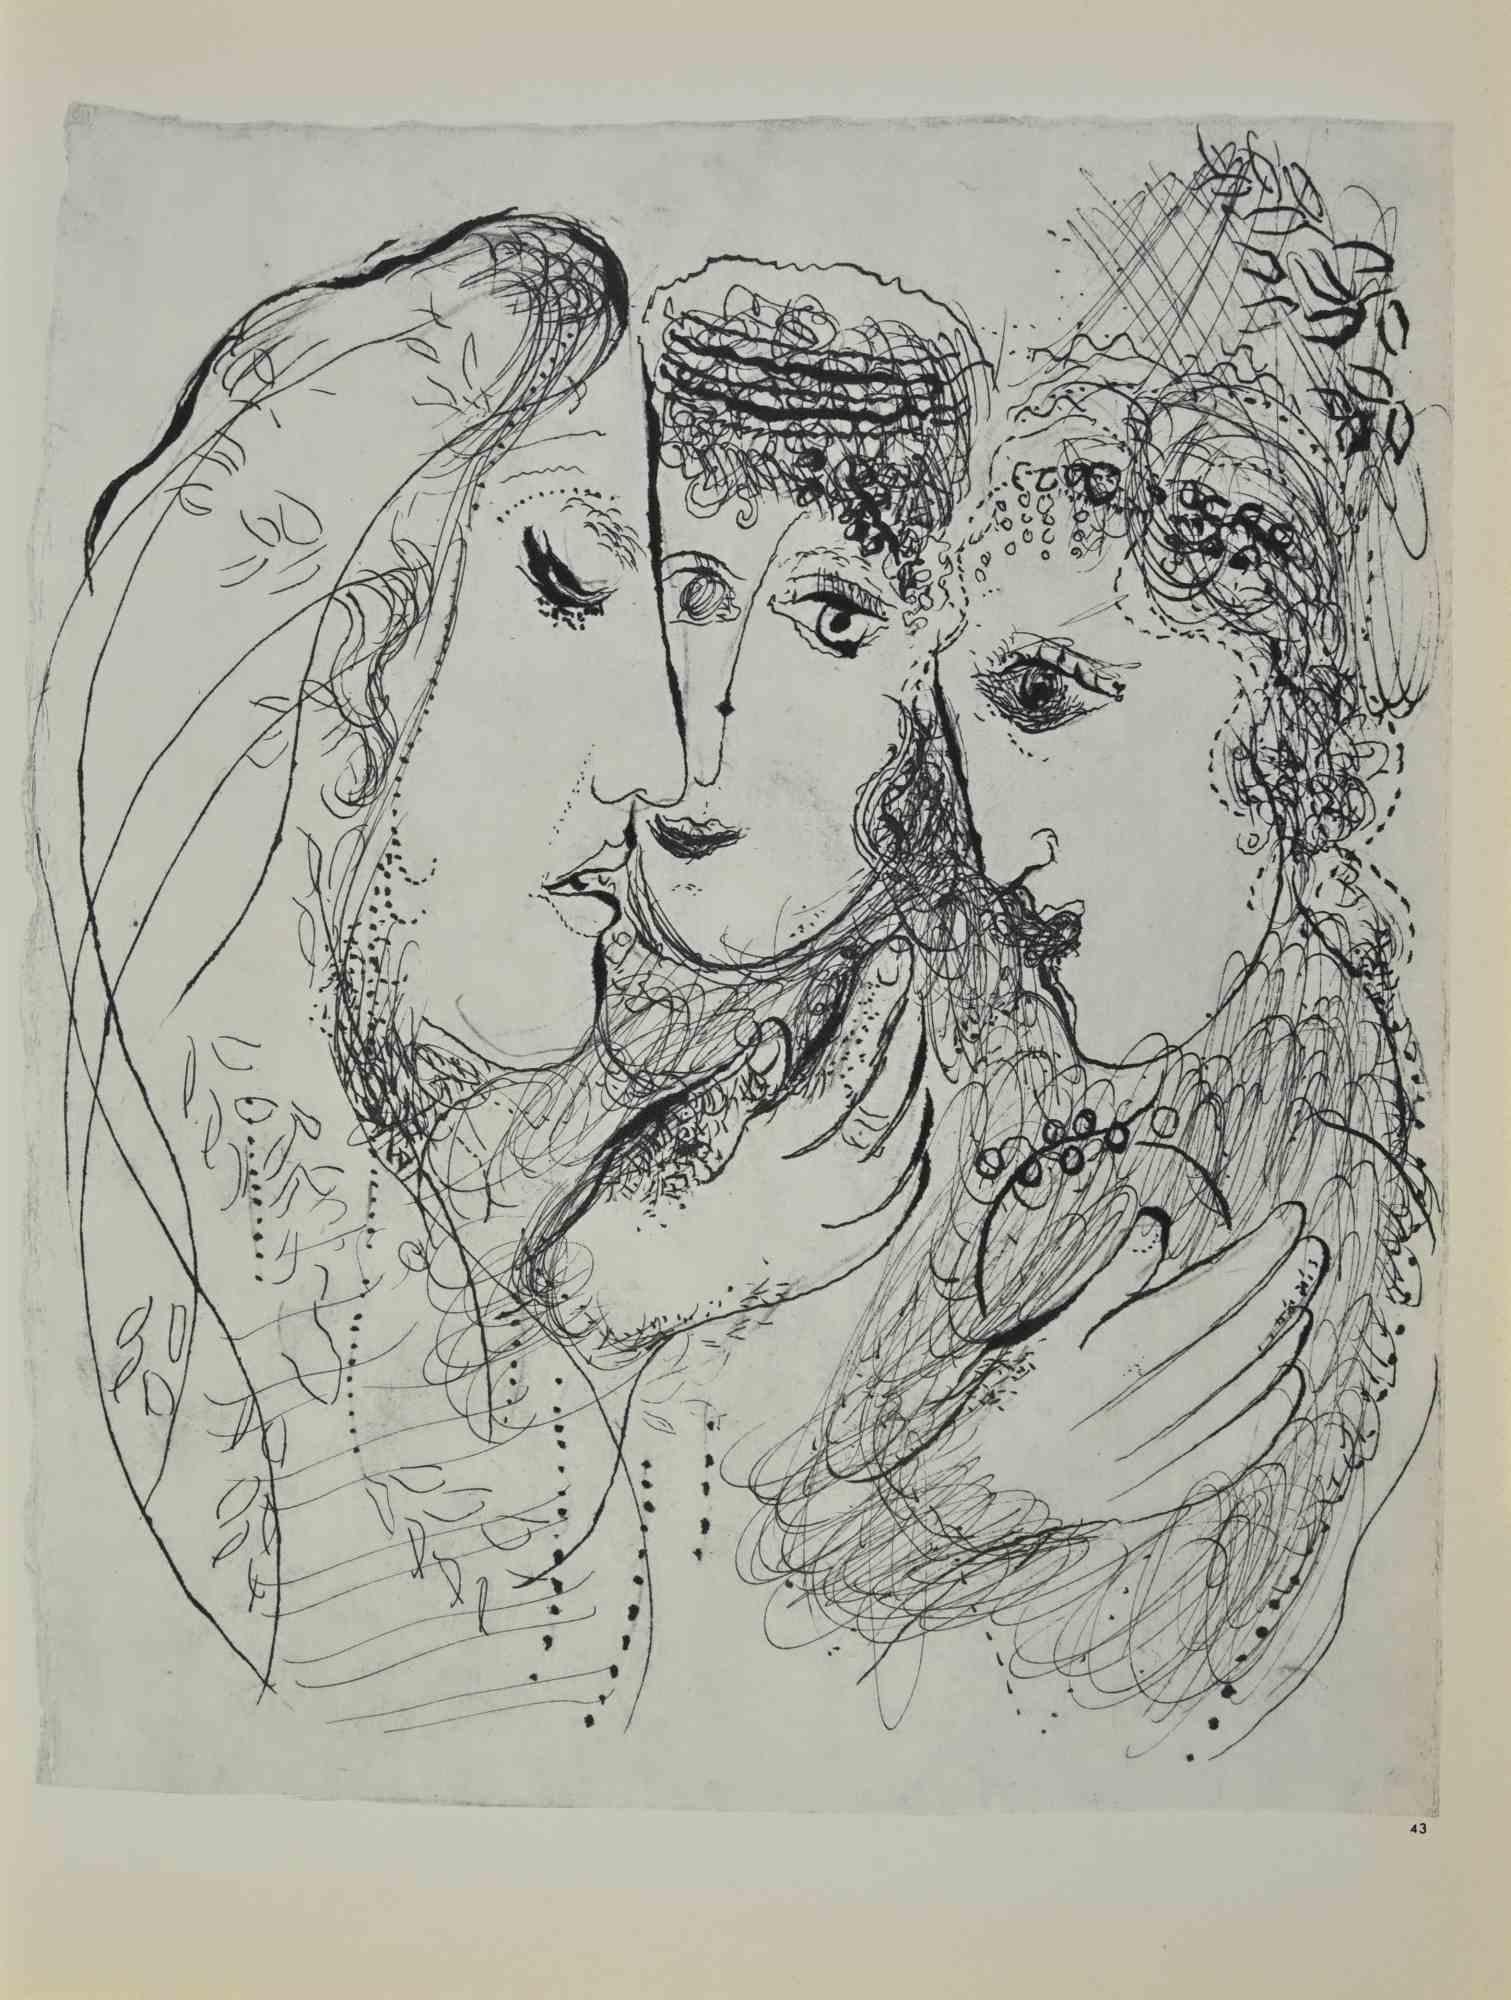 Naomi et sus Brus  is an artwork realized by March Chagall, 1960s.

Lithograph on brown-toned paper, no signature.

Lithograph on both sheets.

Edition of 6500 unsigned lithographs. Printed by Mourlot and published by Tériade, Paris.

Ref. Mourlot,